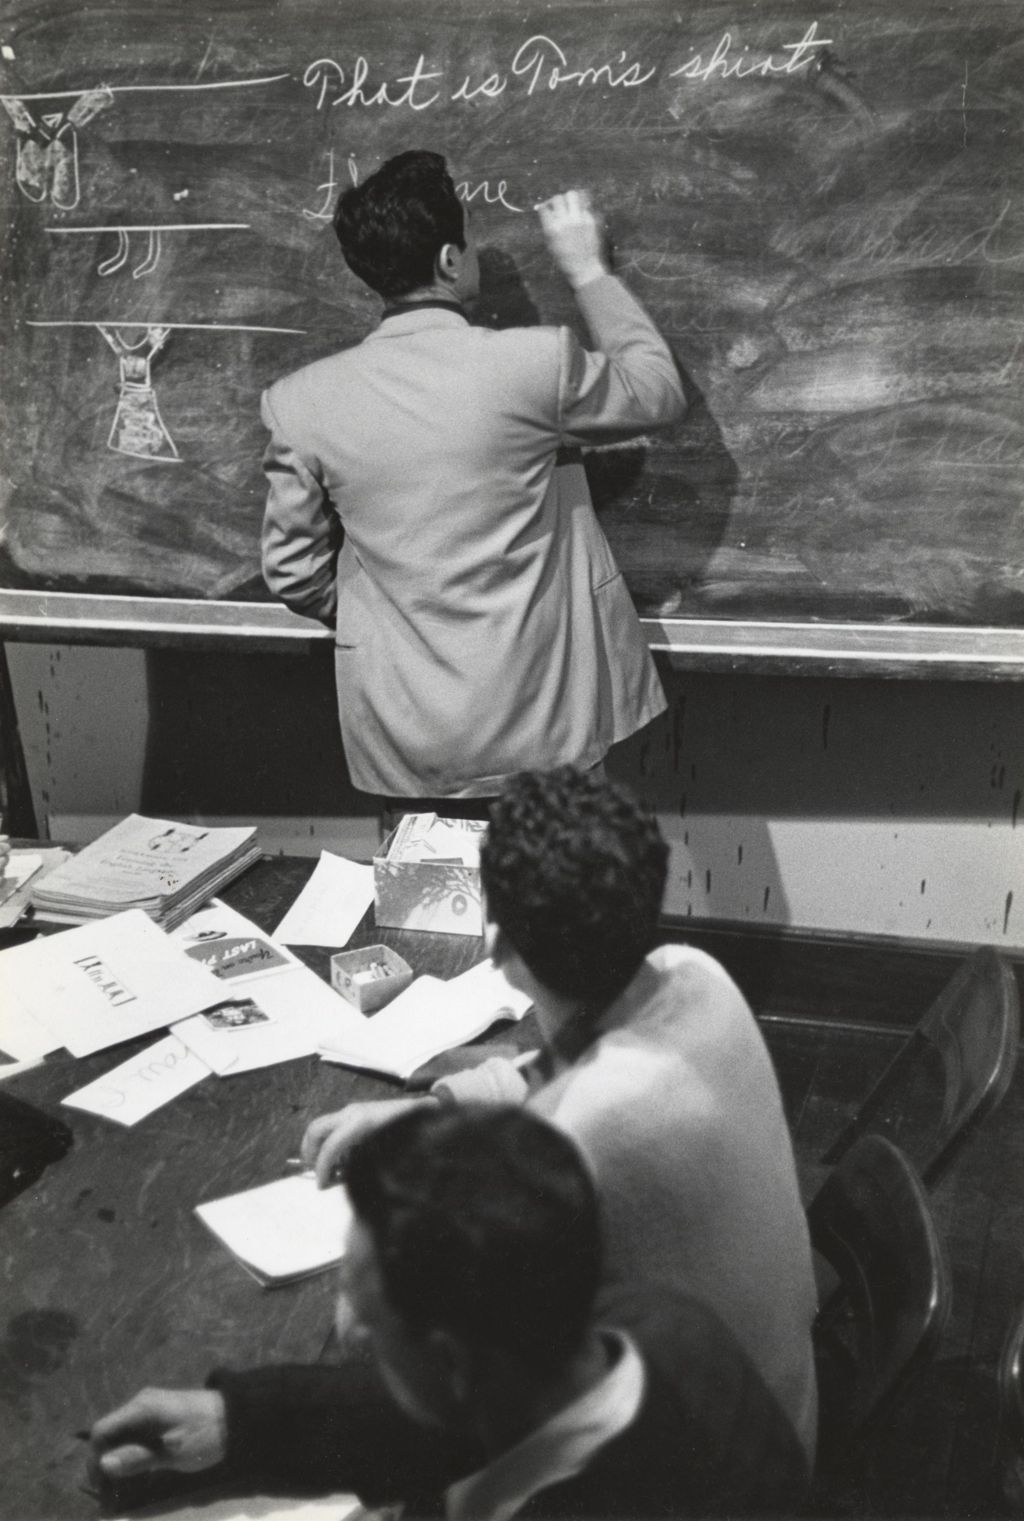 Miniature of Instructor at the blackboard with students during Adult Education class